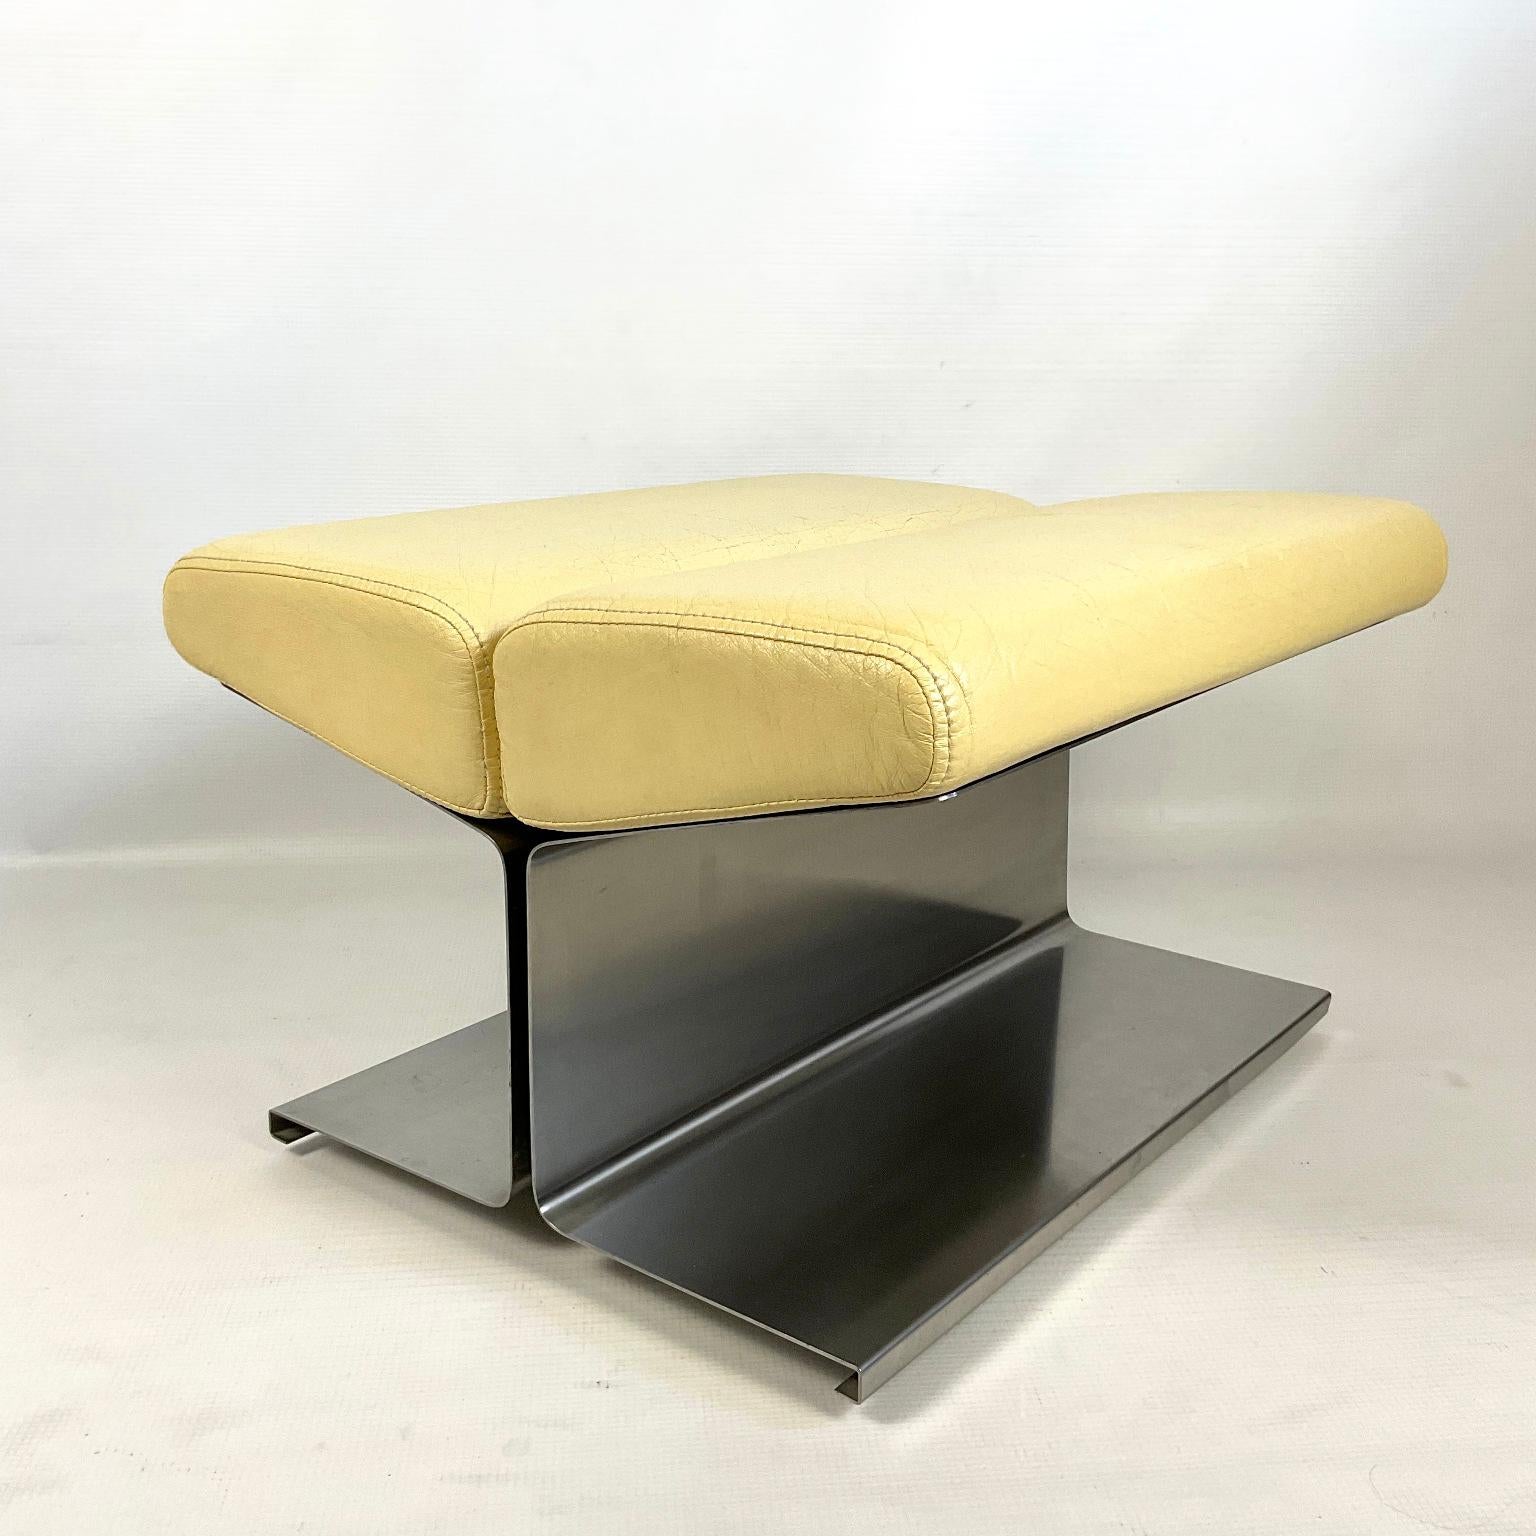 A rare model of the ottoman or footrest from the 70s in brushed stainless steel by Paul Geoffroy, very little produced by the Uginox factory.
His works are in the same spirit as creators like Maria Pergay, Michel Boyer, Jacques Charpentier,